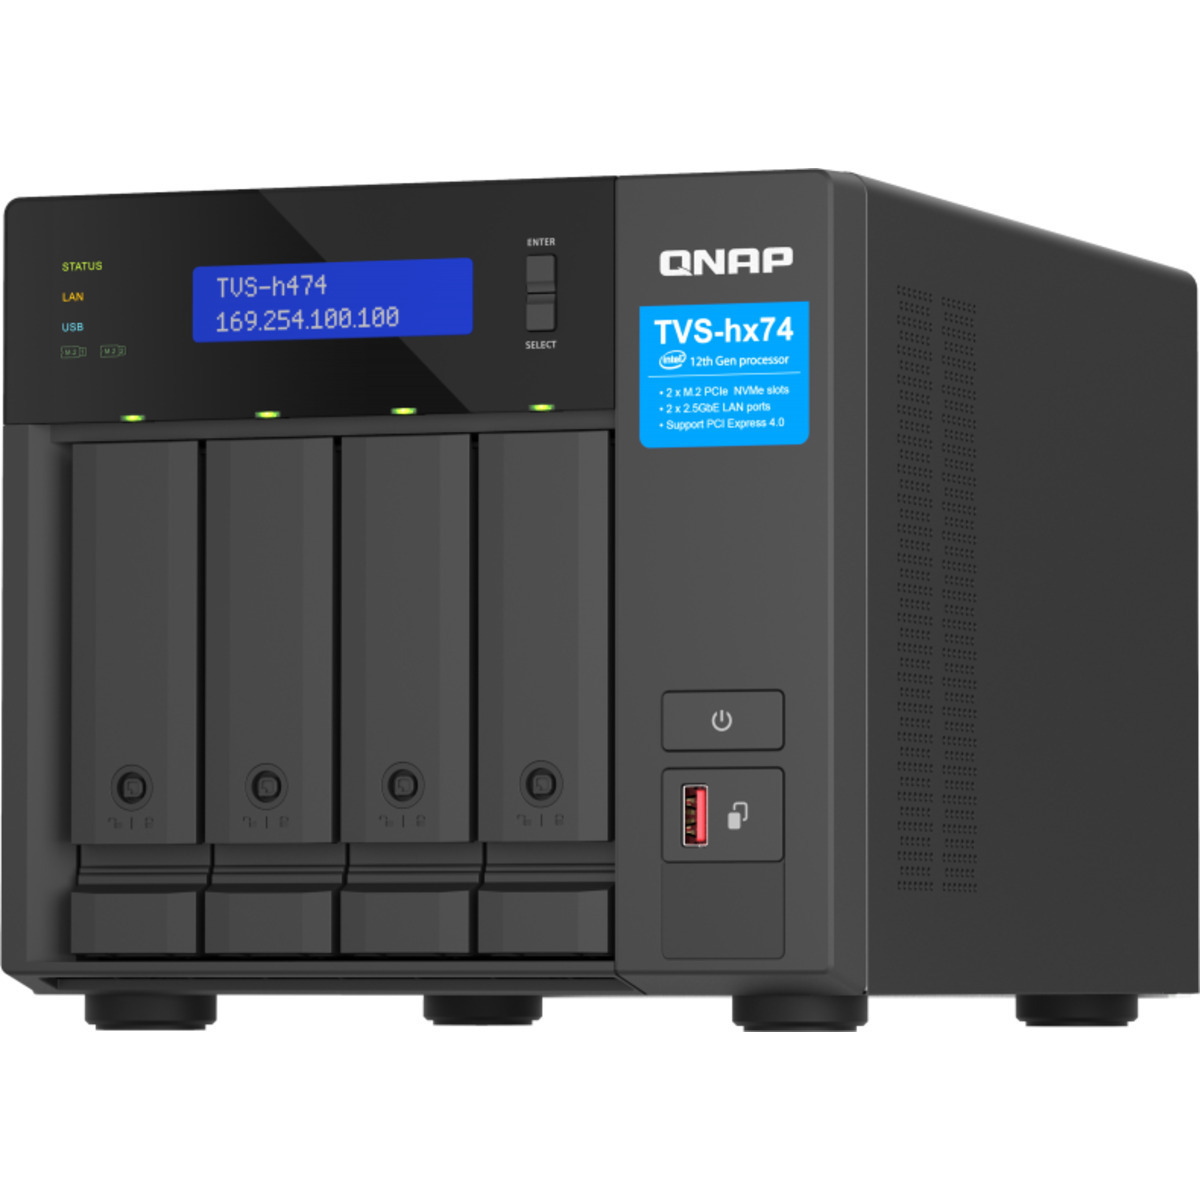 buy $2452 QNAP TVS-h474 Pentium Gold 8tb Desktop NAS - Network Attached Storage Device 4x2000gb Western Digital Red SA500 WDS200T1R0A 2.5 560/530MB/s SATA 6Gb/s SSD NAS Class Drives Installed - Burn-In Tested - FREE RAM UPGRADE - nas headquarters buy network attached storage server device das new raid-5 free shipping usa TVS-h474 Pentium Gold